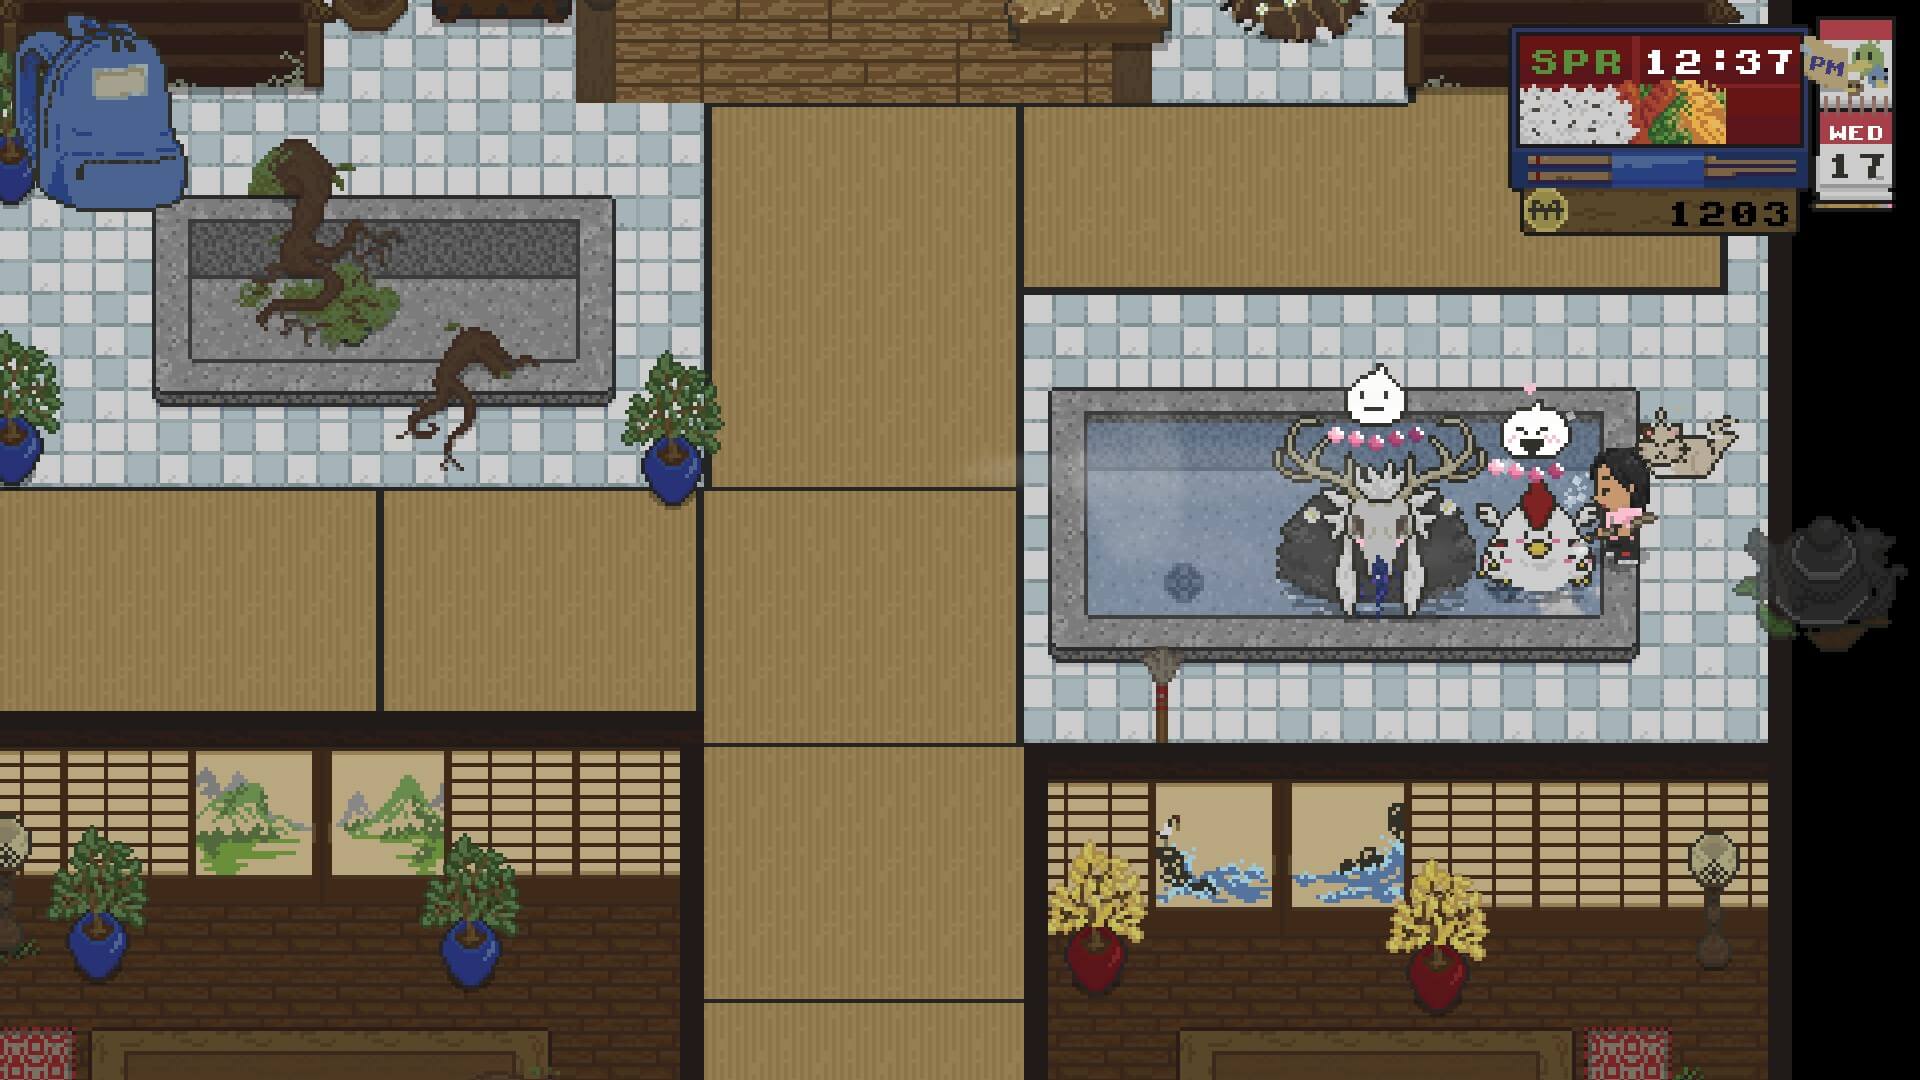 Screencap of Spirittea gameplay. Player character is running the bathhouse/onsen and is scrubbing one of the spirits that is soaking in a hot tub.